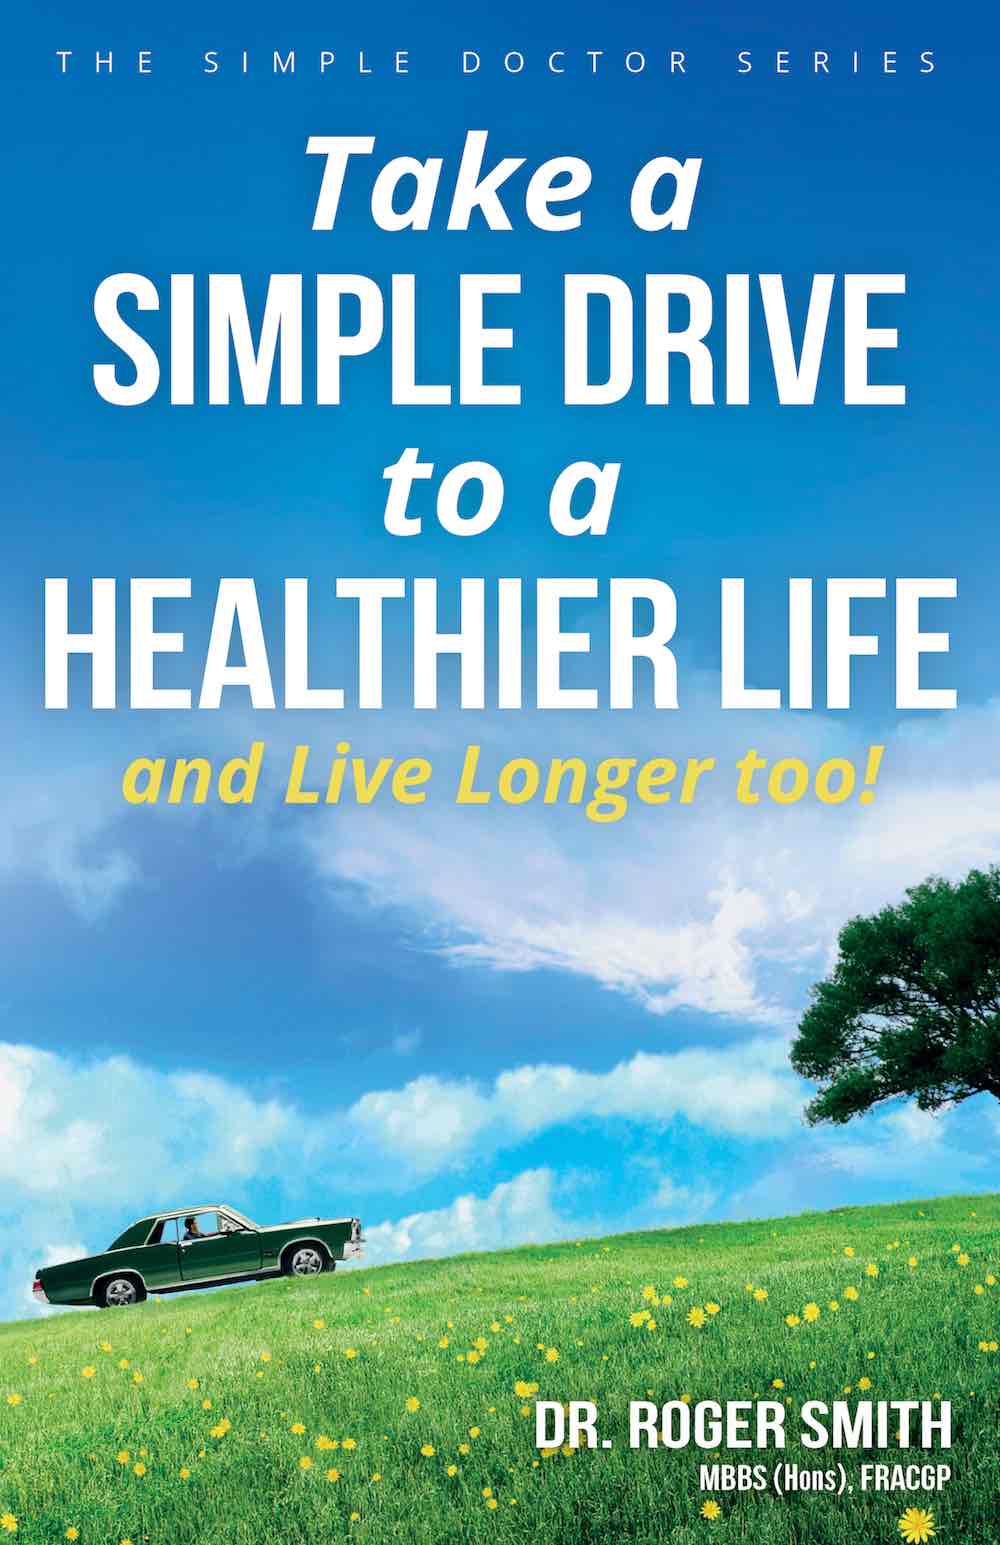 Take a simple drive to a healthier life book